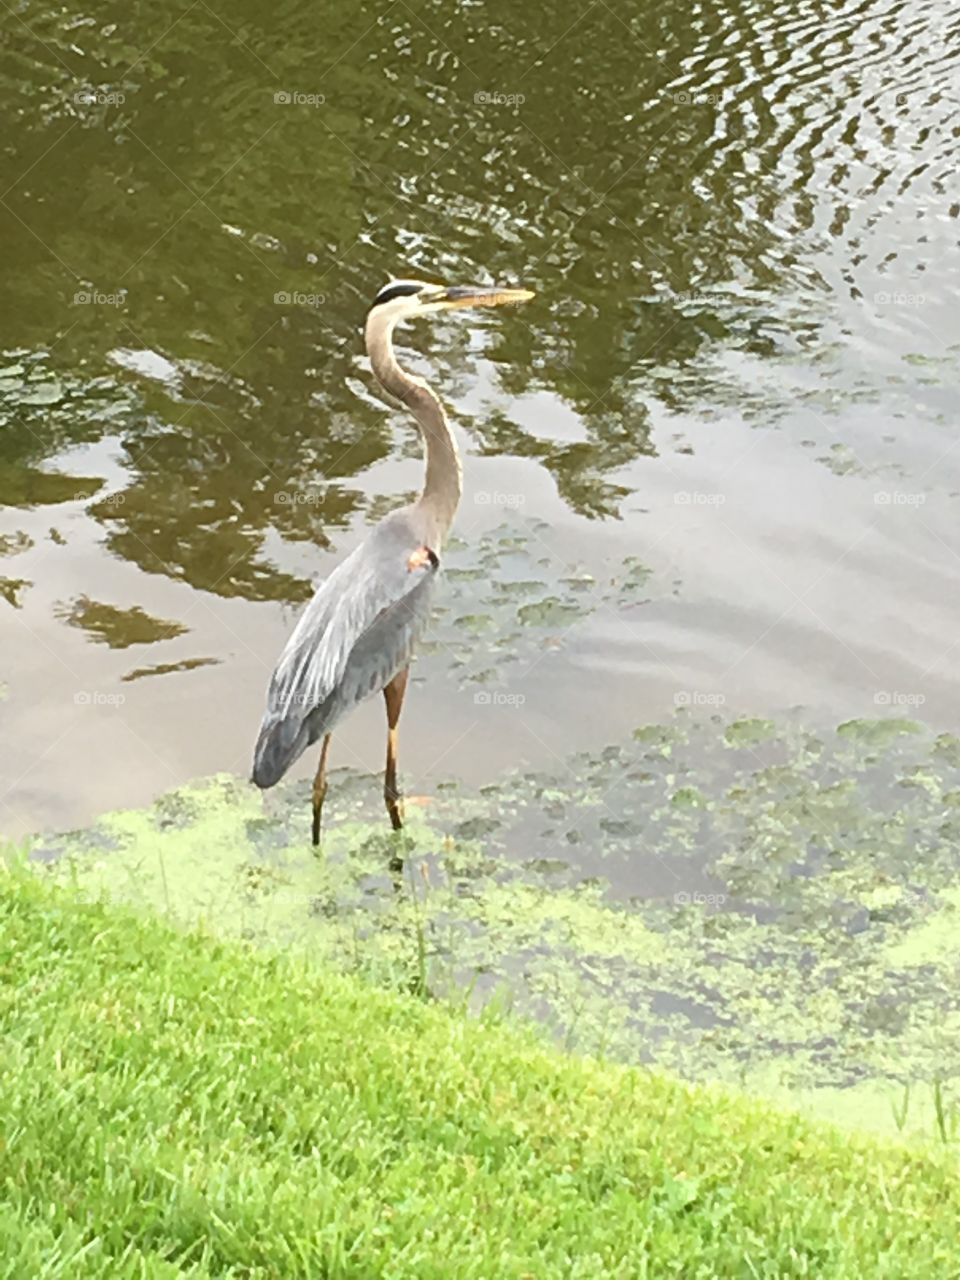 Heron in the pond with a cool reflection